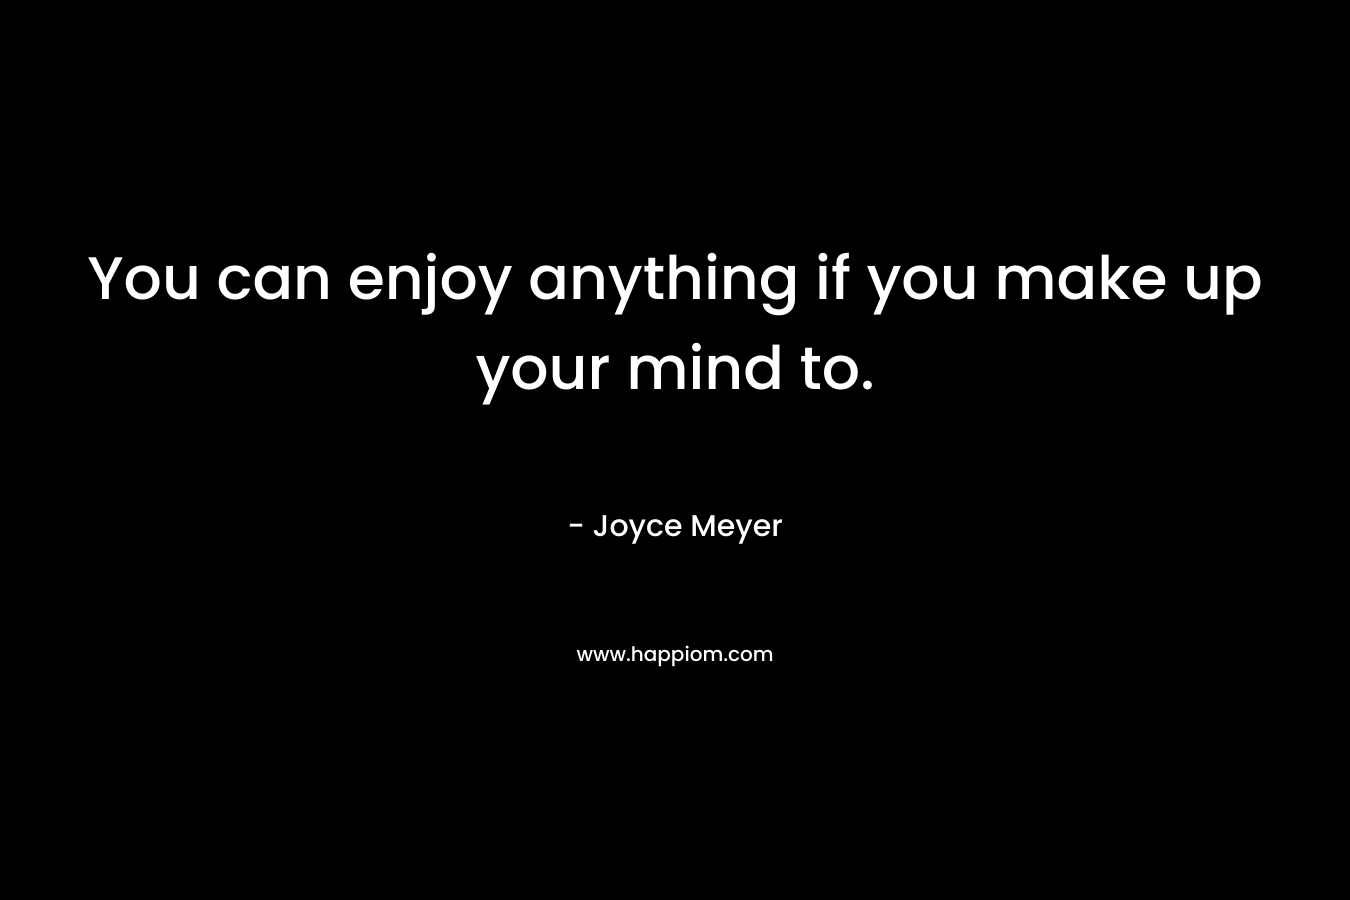 You can enjoy anything if you make up your mind to.